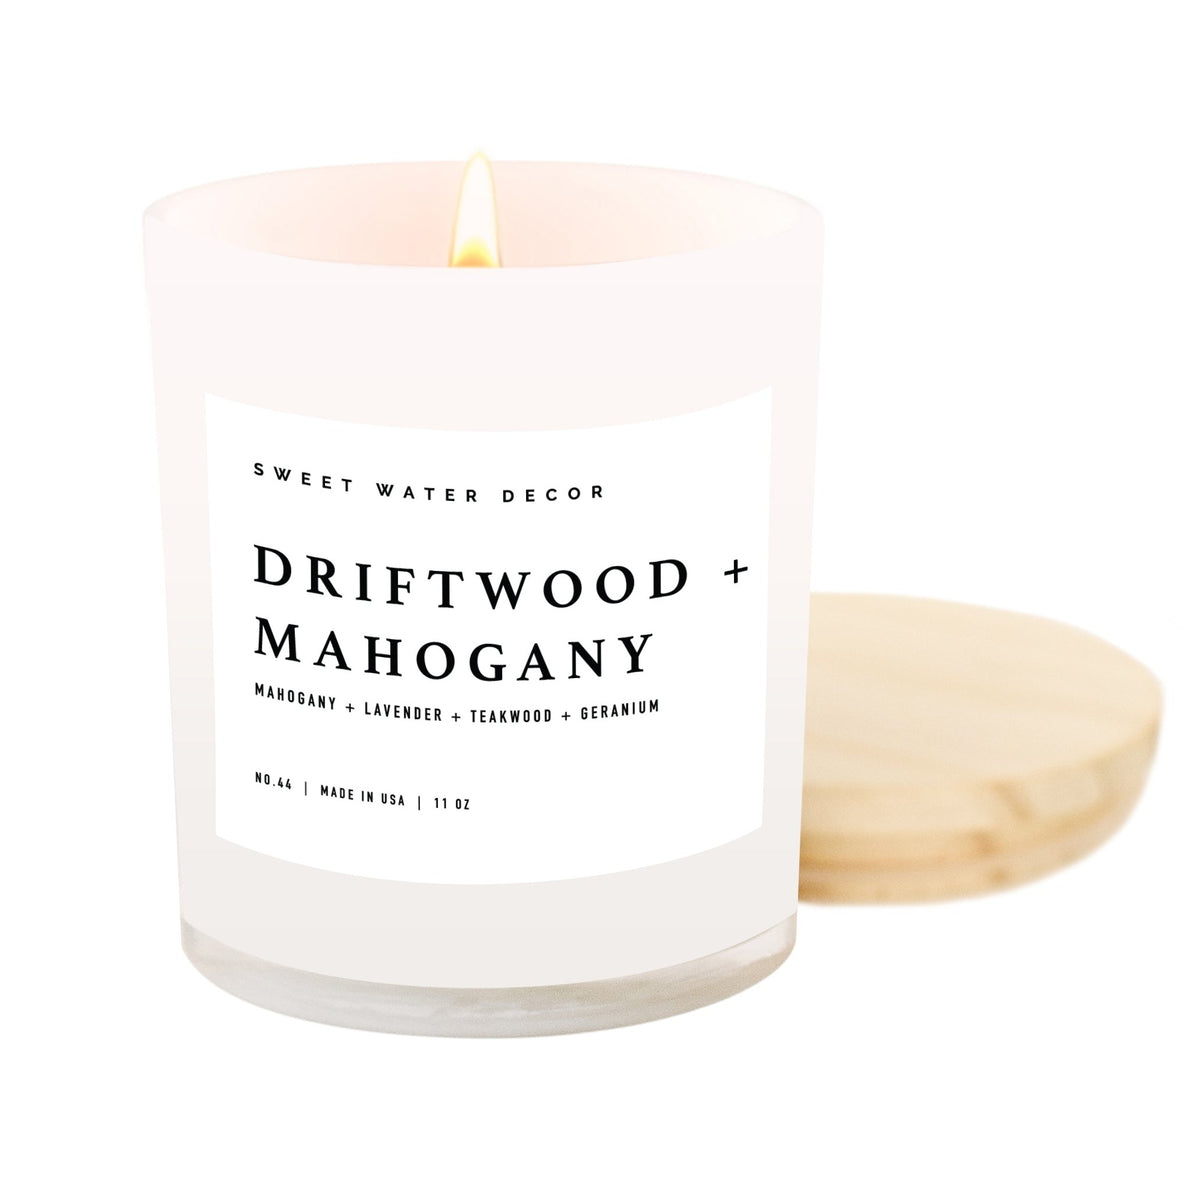 Crafted with a refined and understated aroma of Driftwood and Mahogany, this candle exudes a masculine and subtle essence.